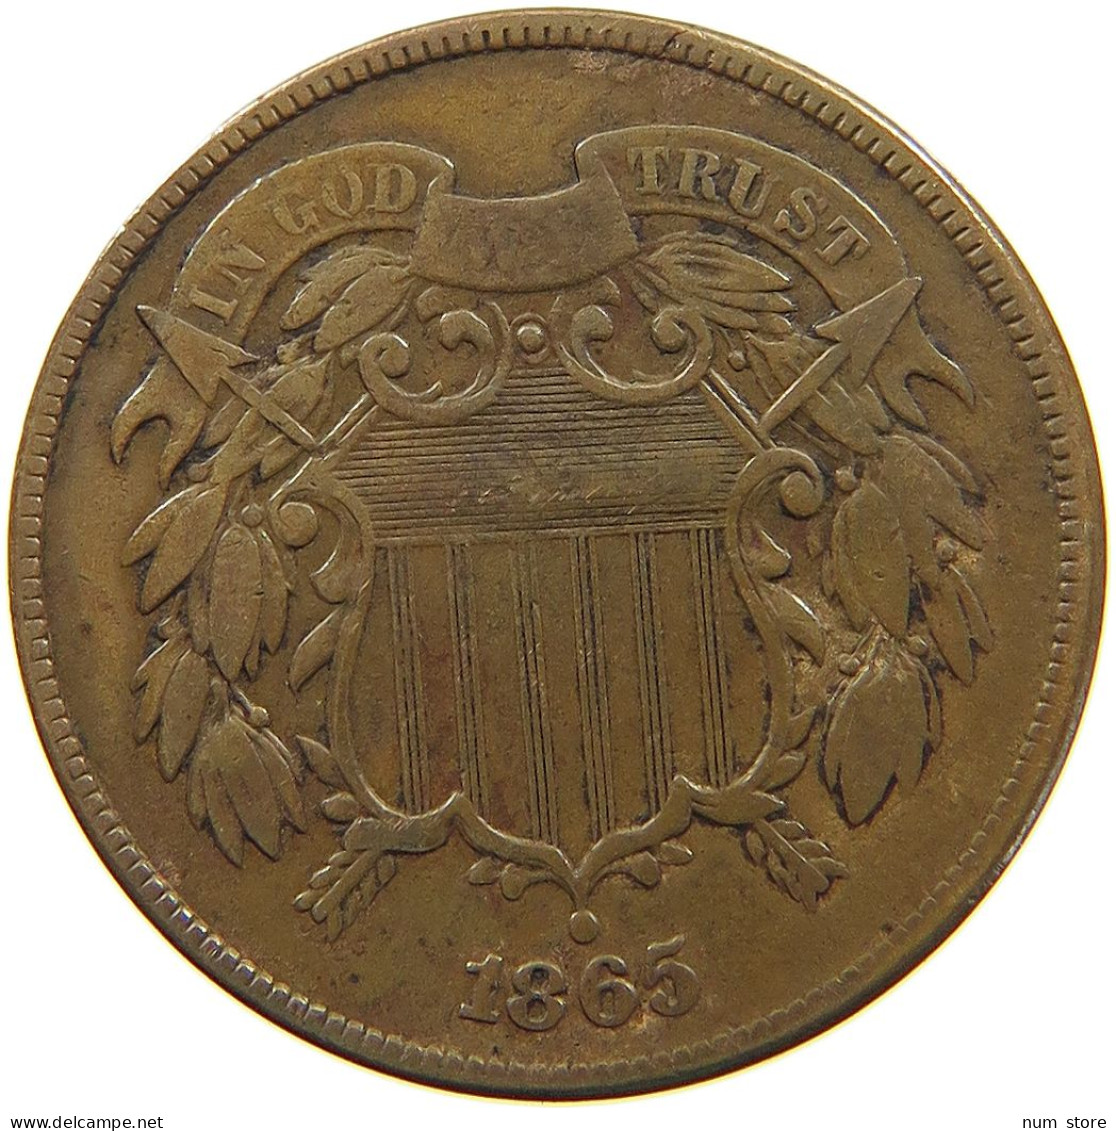 UNITED STATES OF AMERICA TWO CENTS 1865  #t086 0135 - 2, 3 & 20 Cents